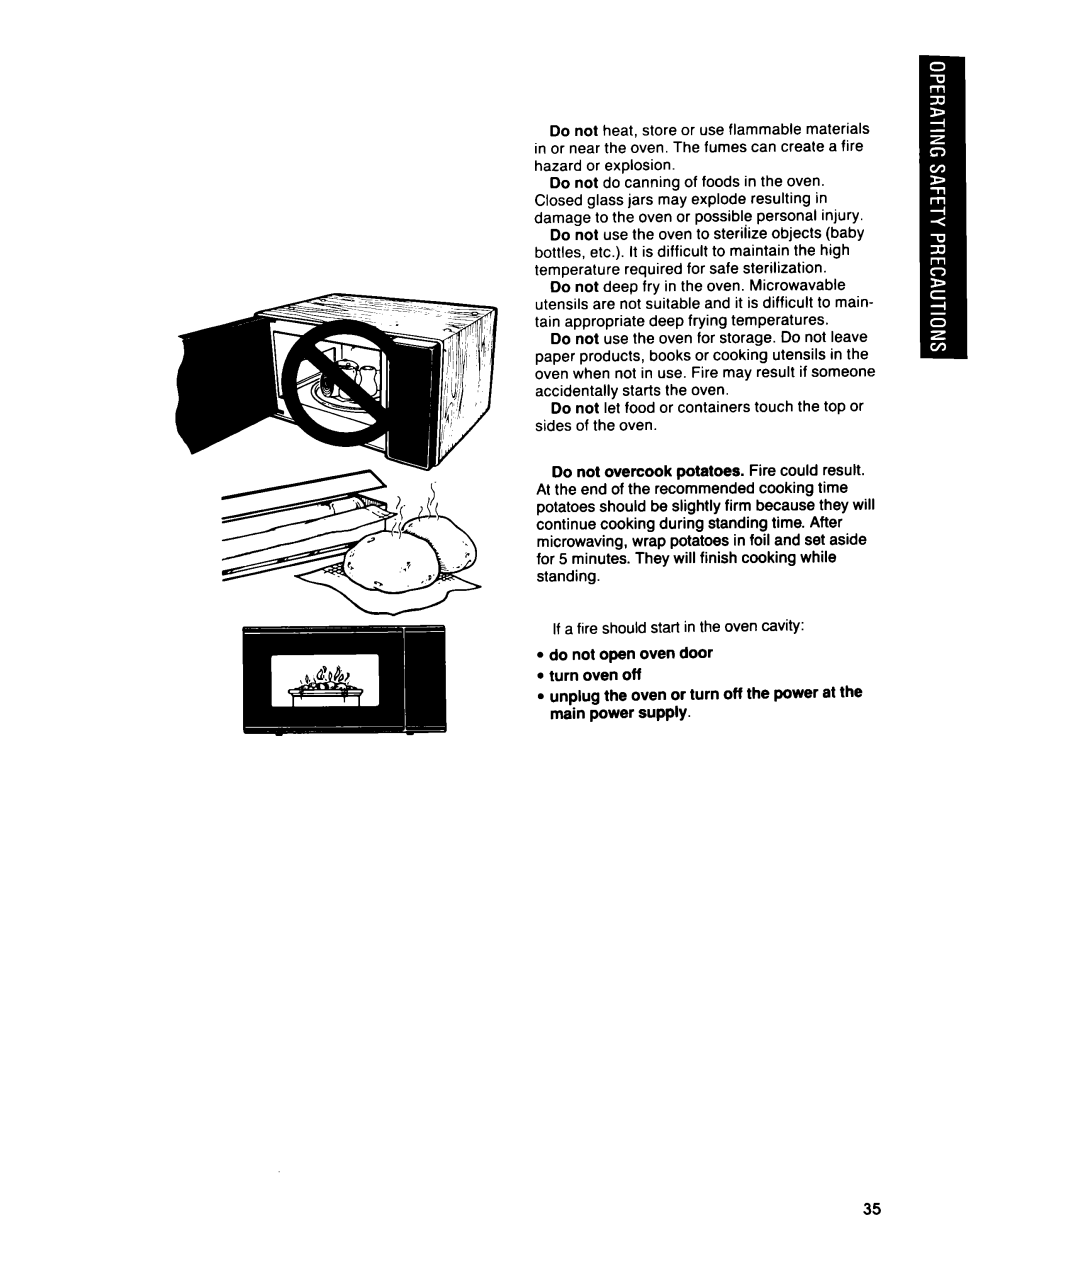 Whirlpool MTZ080XY user manual If a fire should start in the oven cavity 